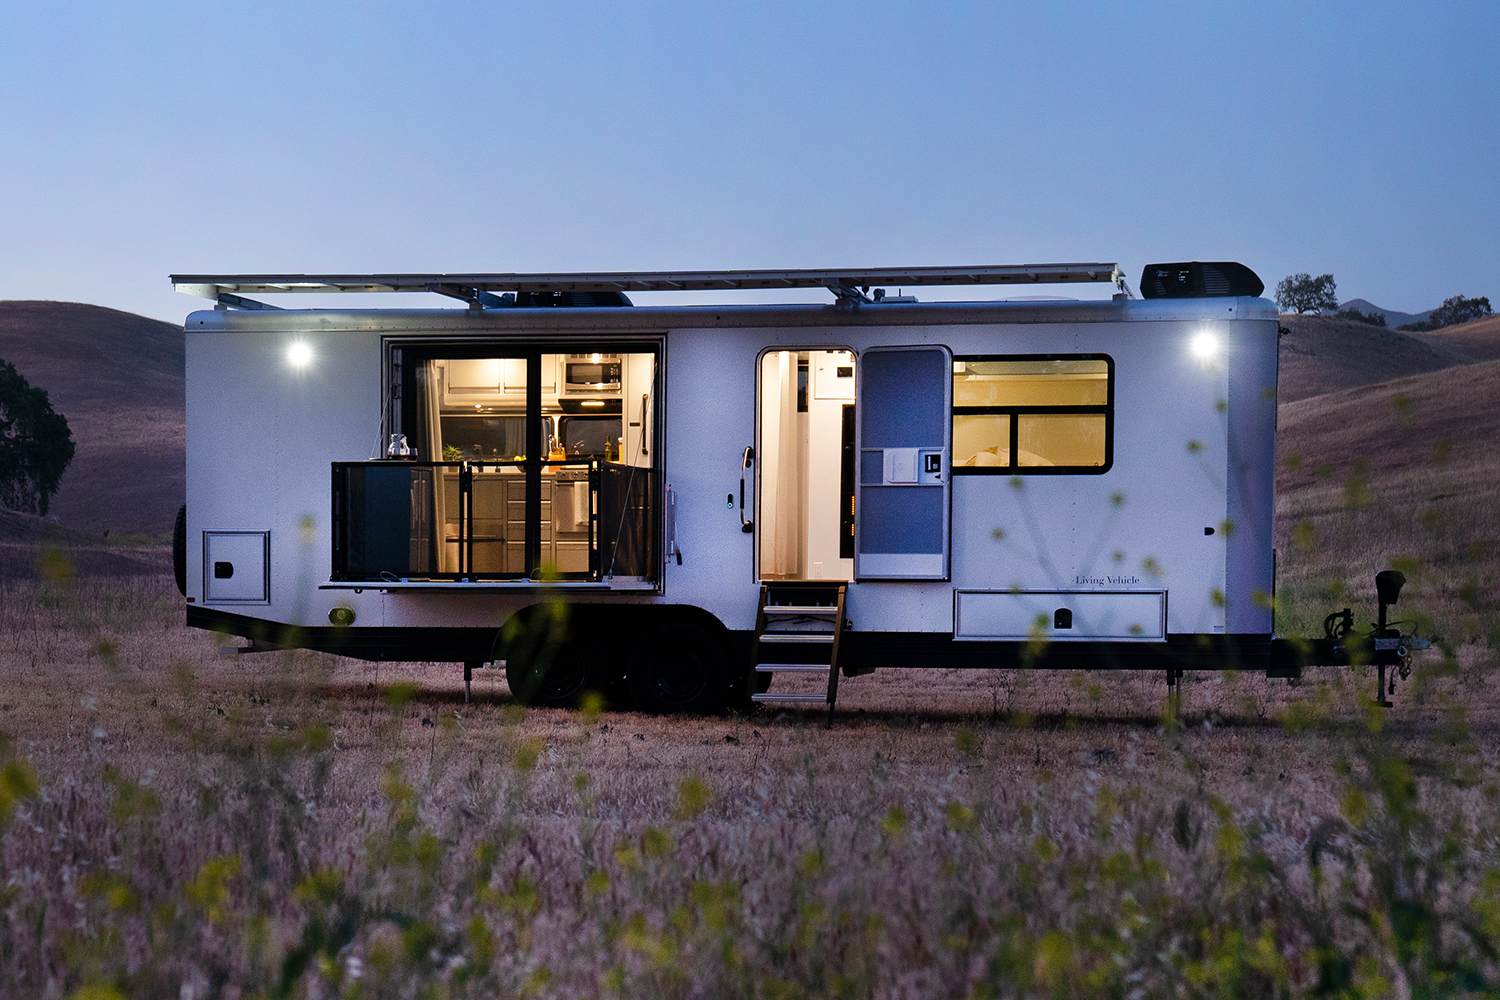 The Living Vehicle, an off-grid travel trailer, in a field at night